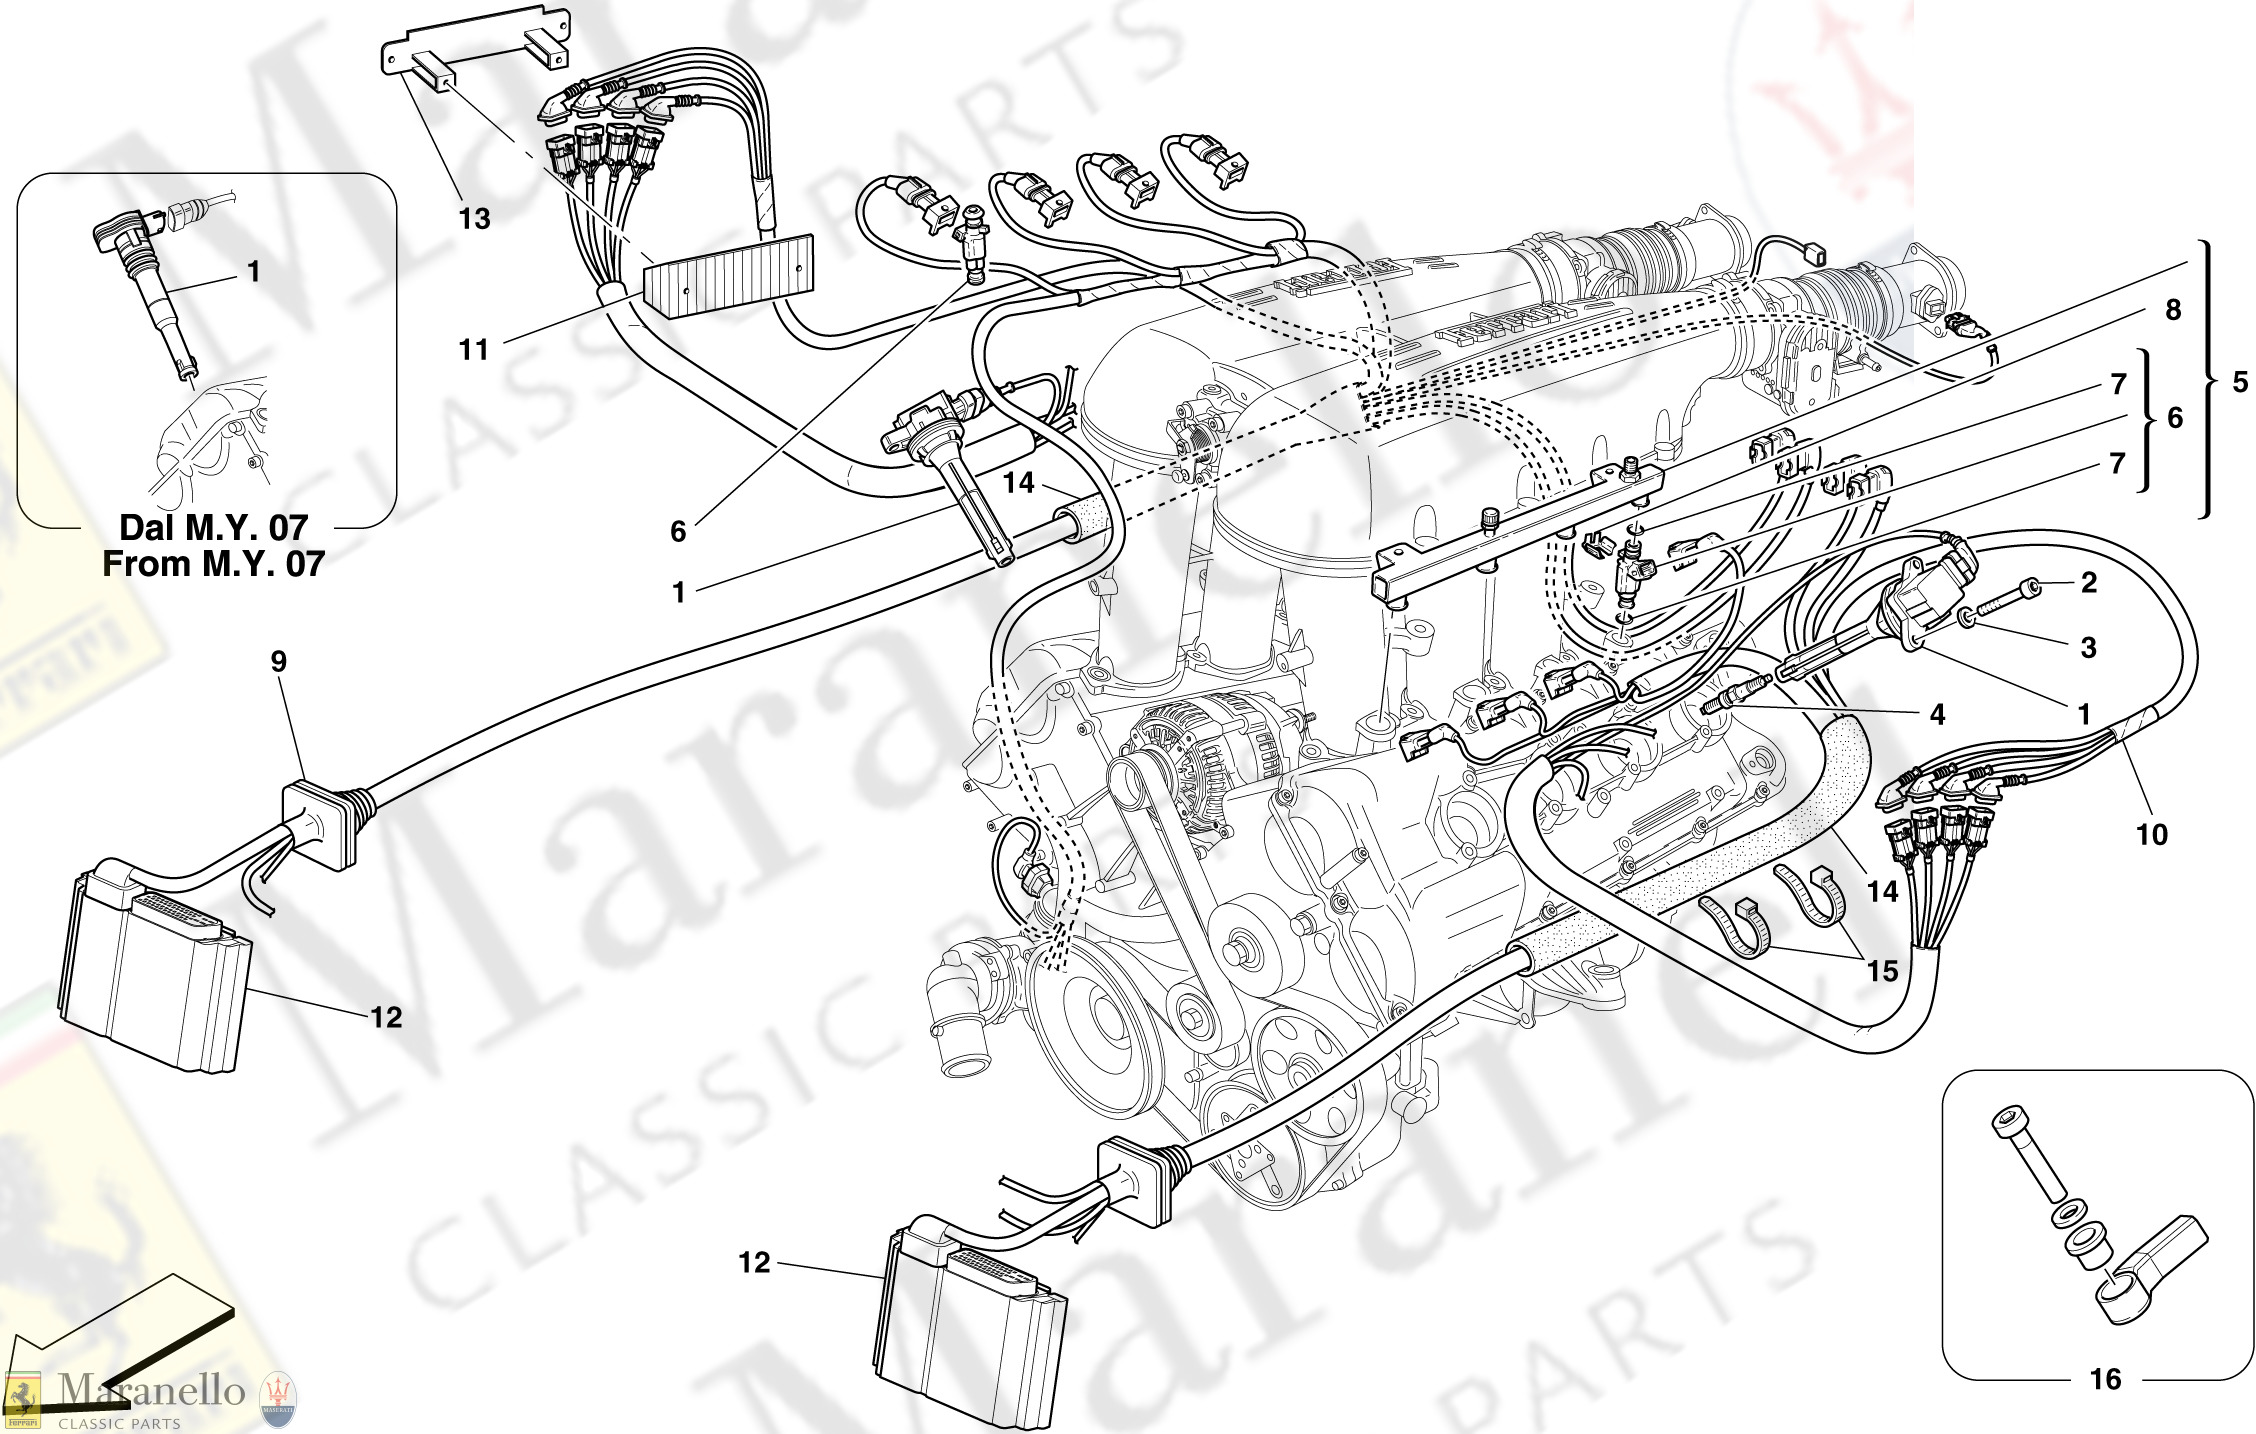 007 - Injection - Ignition System